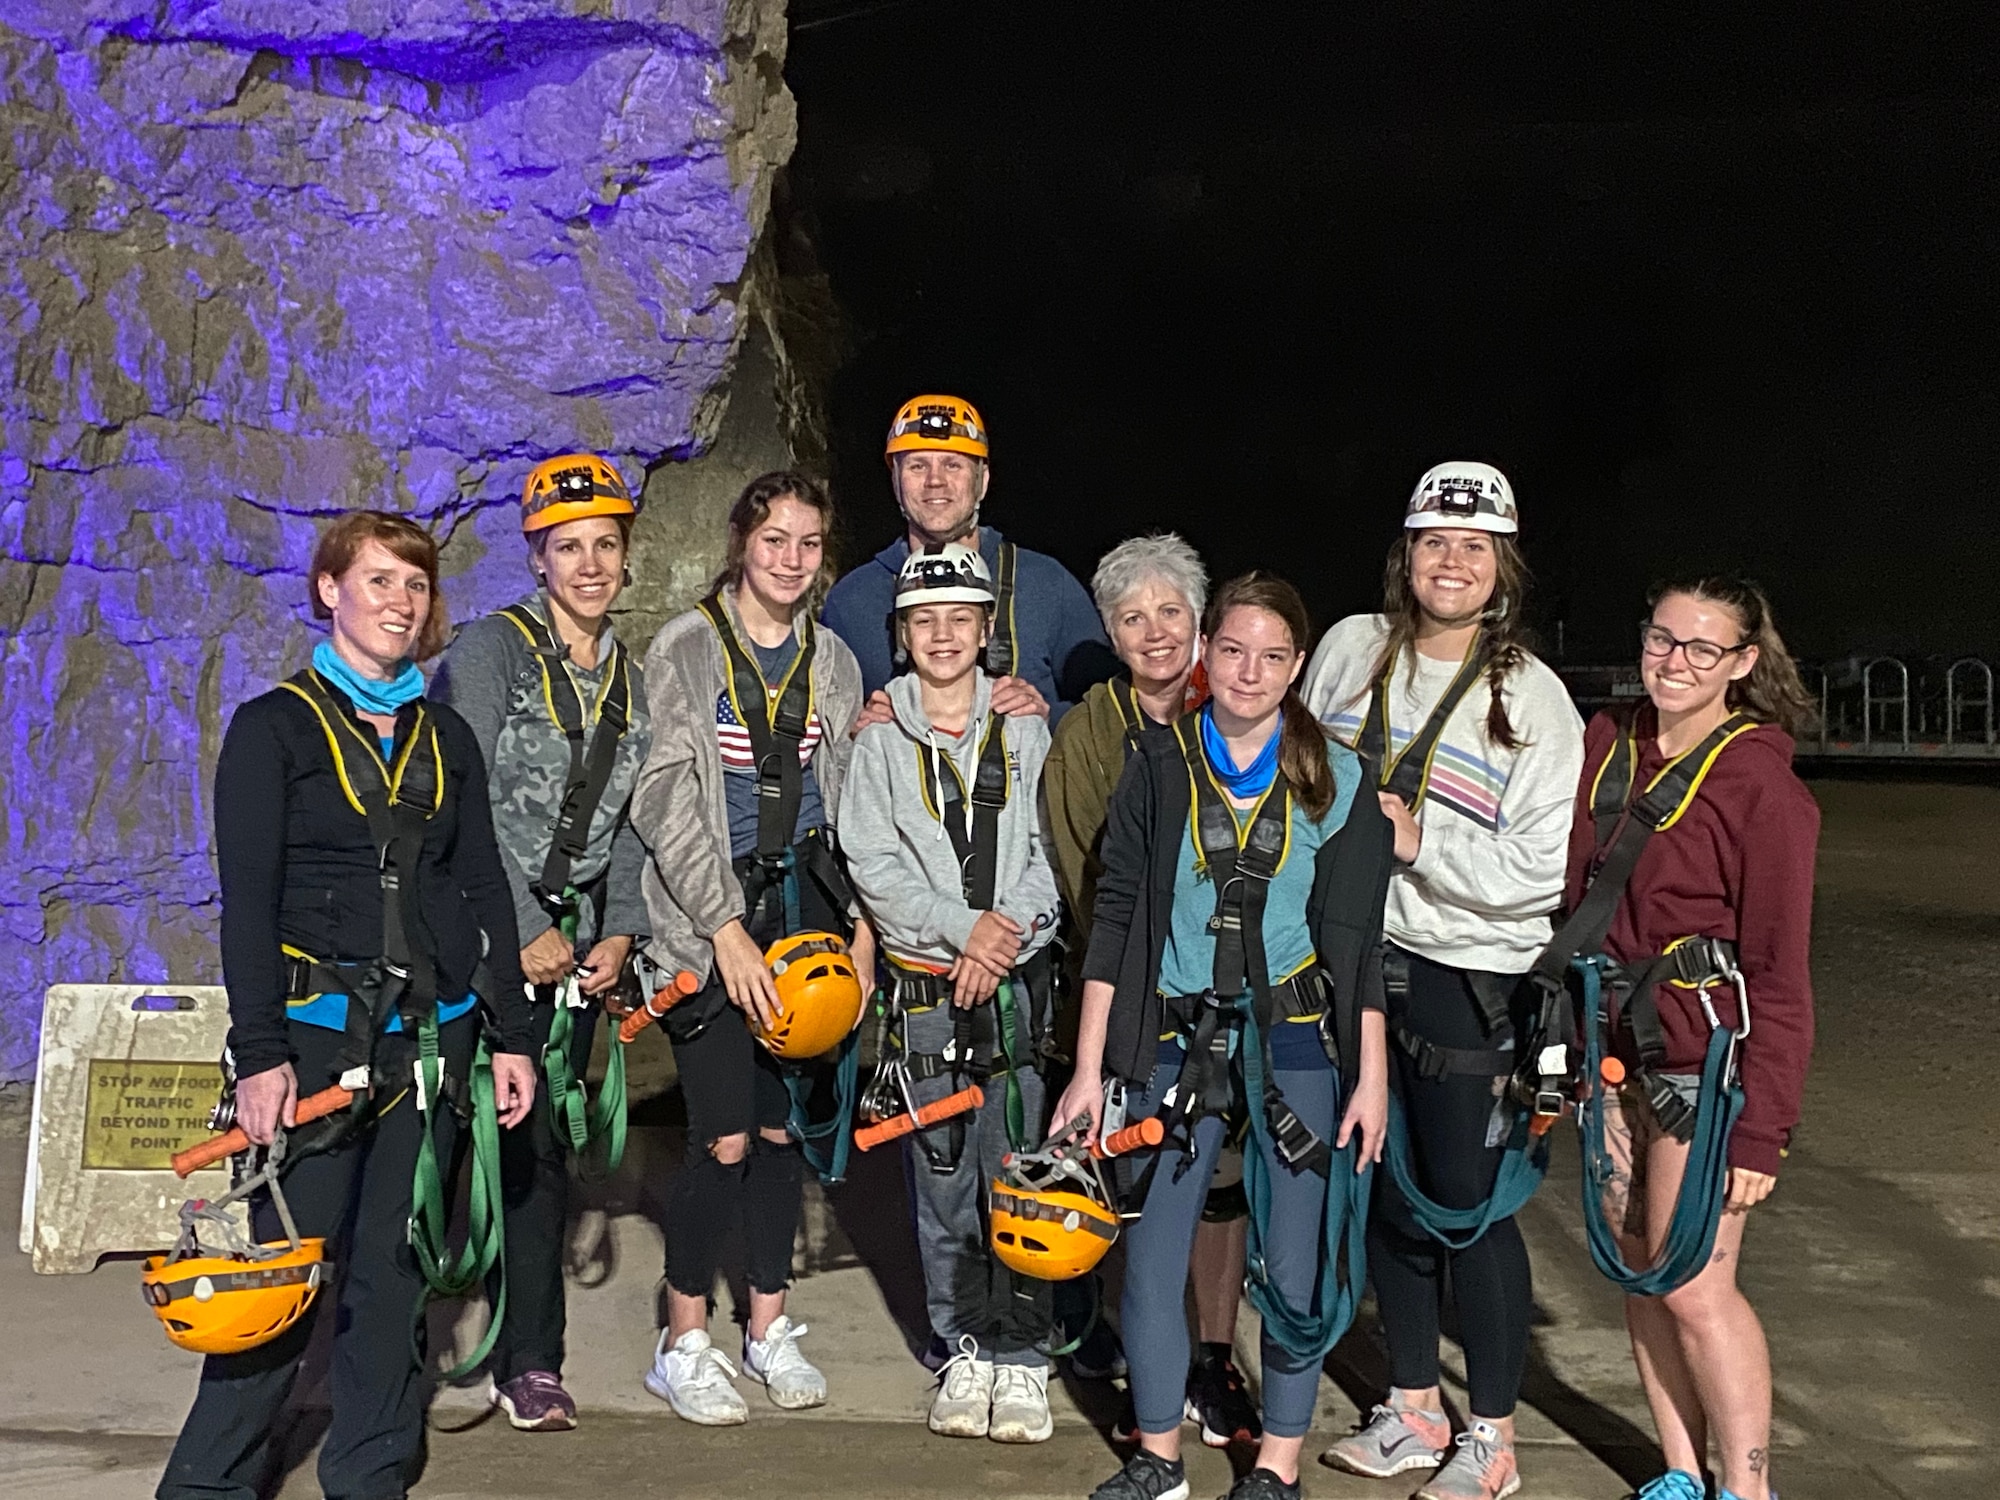 Airmen and their families from Grissom Air Reserve Base, pose for a photo during an underground adventure. The group from Grissom was participating in the Recharge for Resiliency program. (Courtesy Photo)